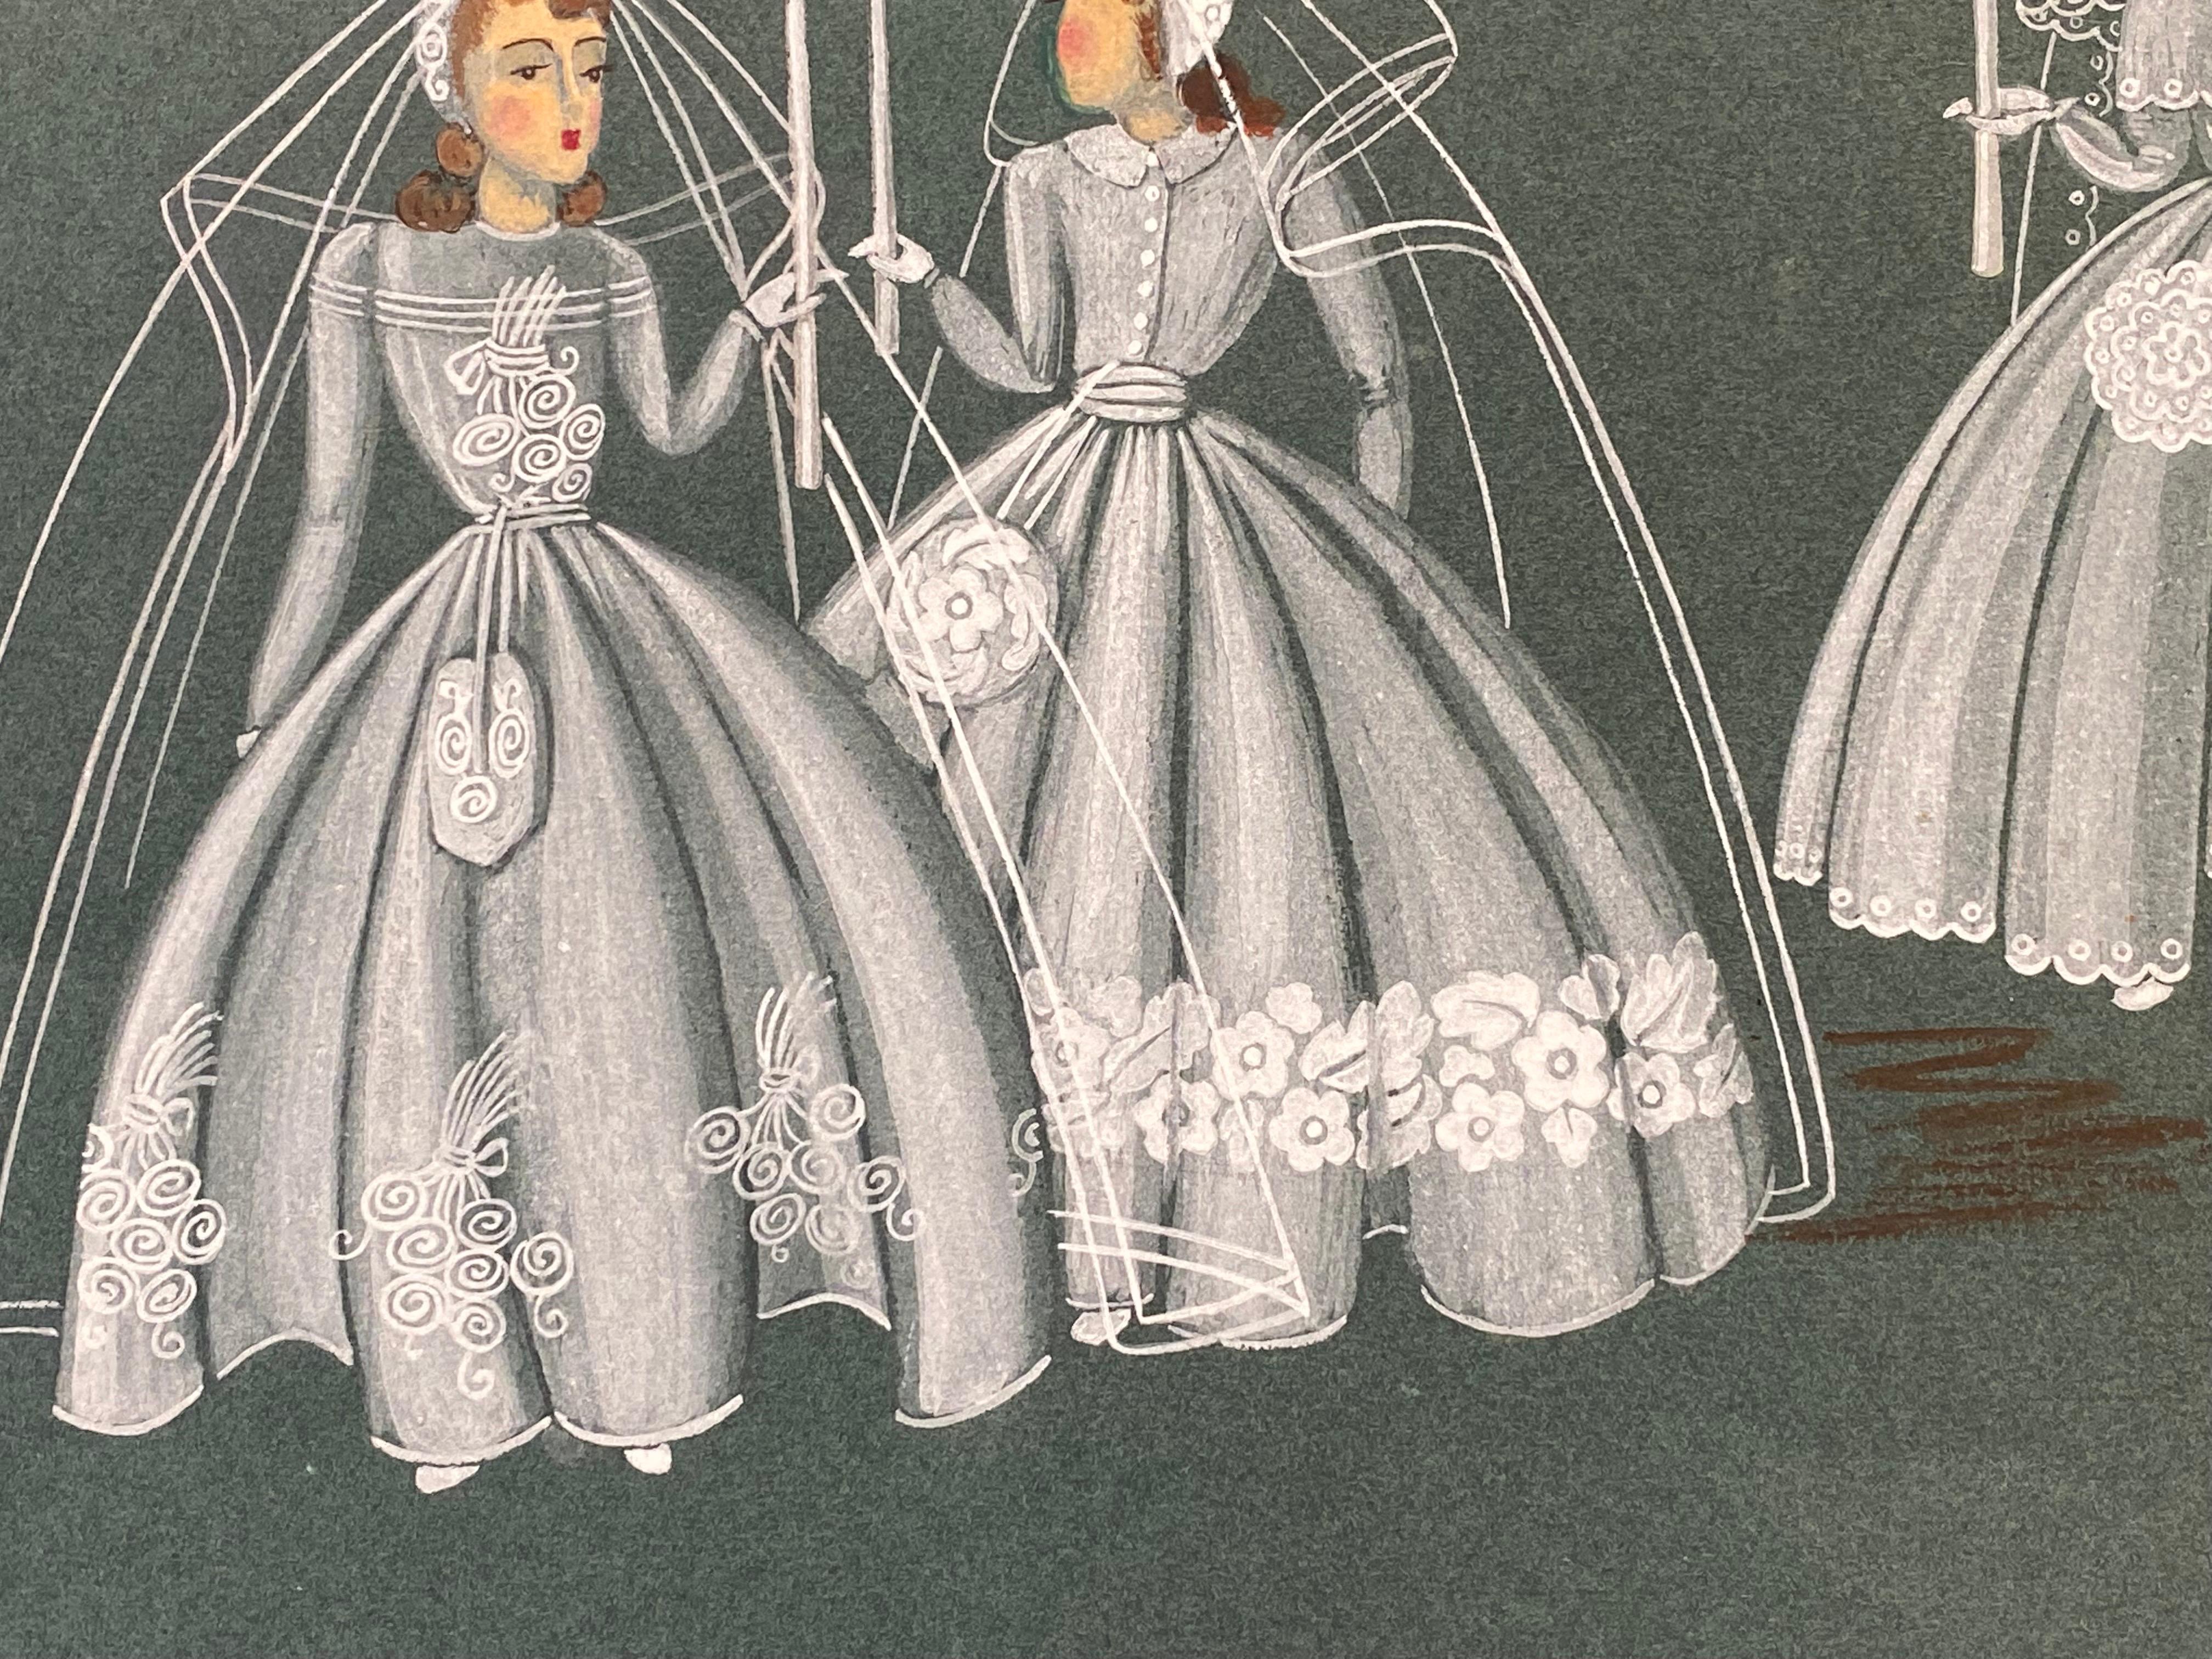 1940's Fashion Illustration - Four Brides Holding Candles - Gray Portrait Painting by Geneviève Thomas